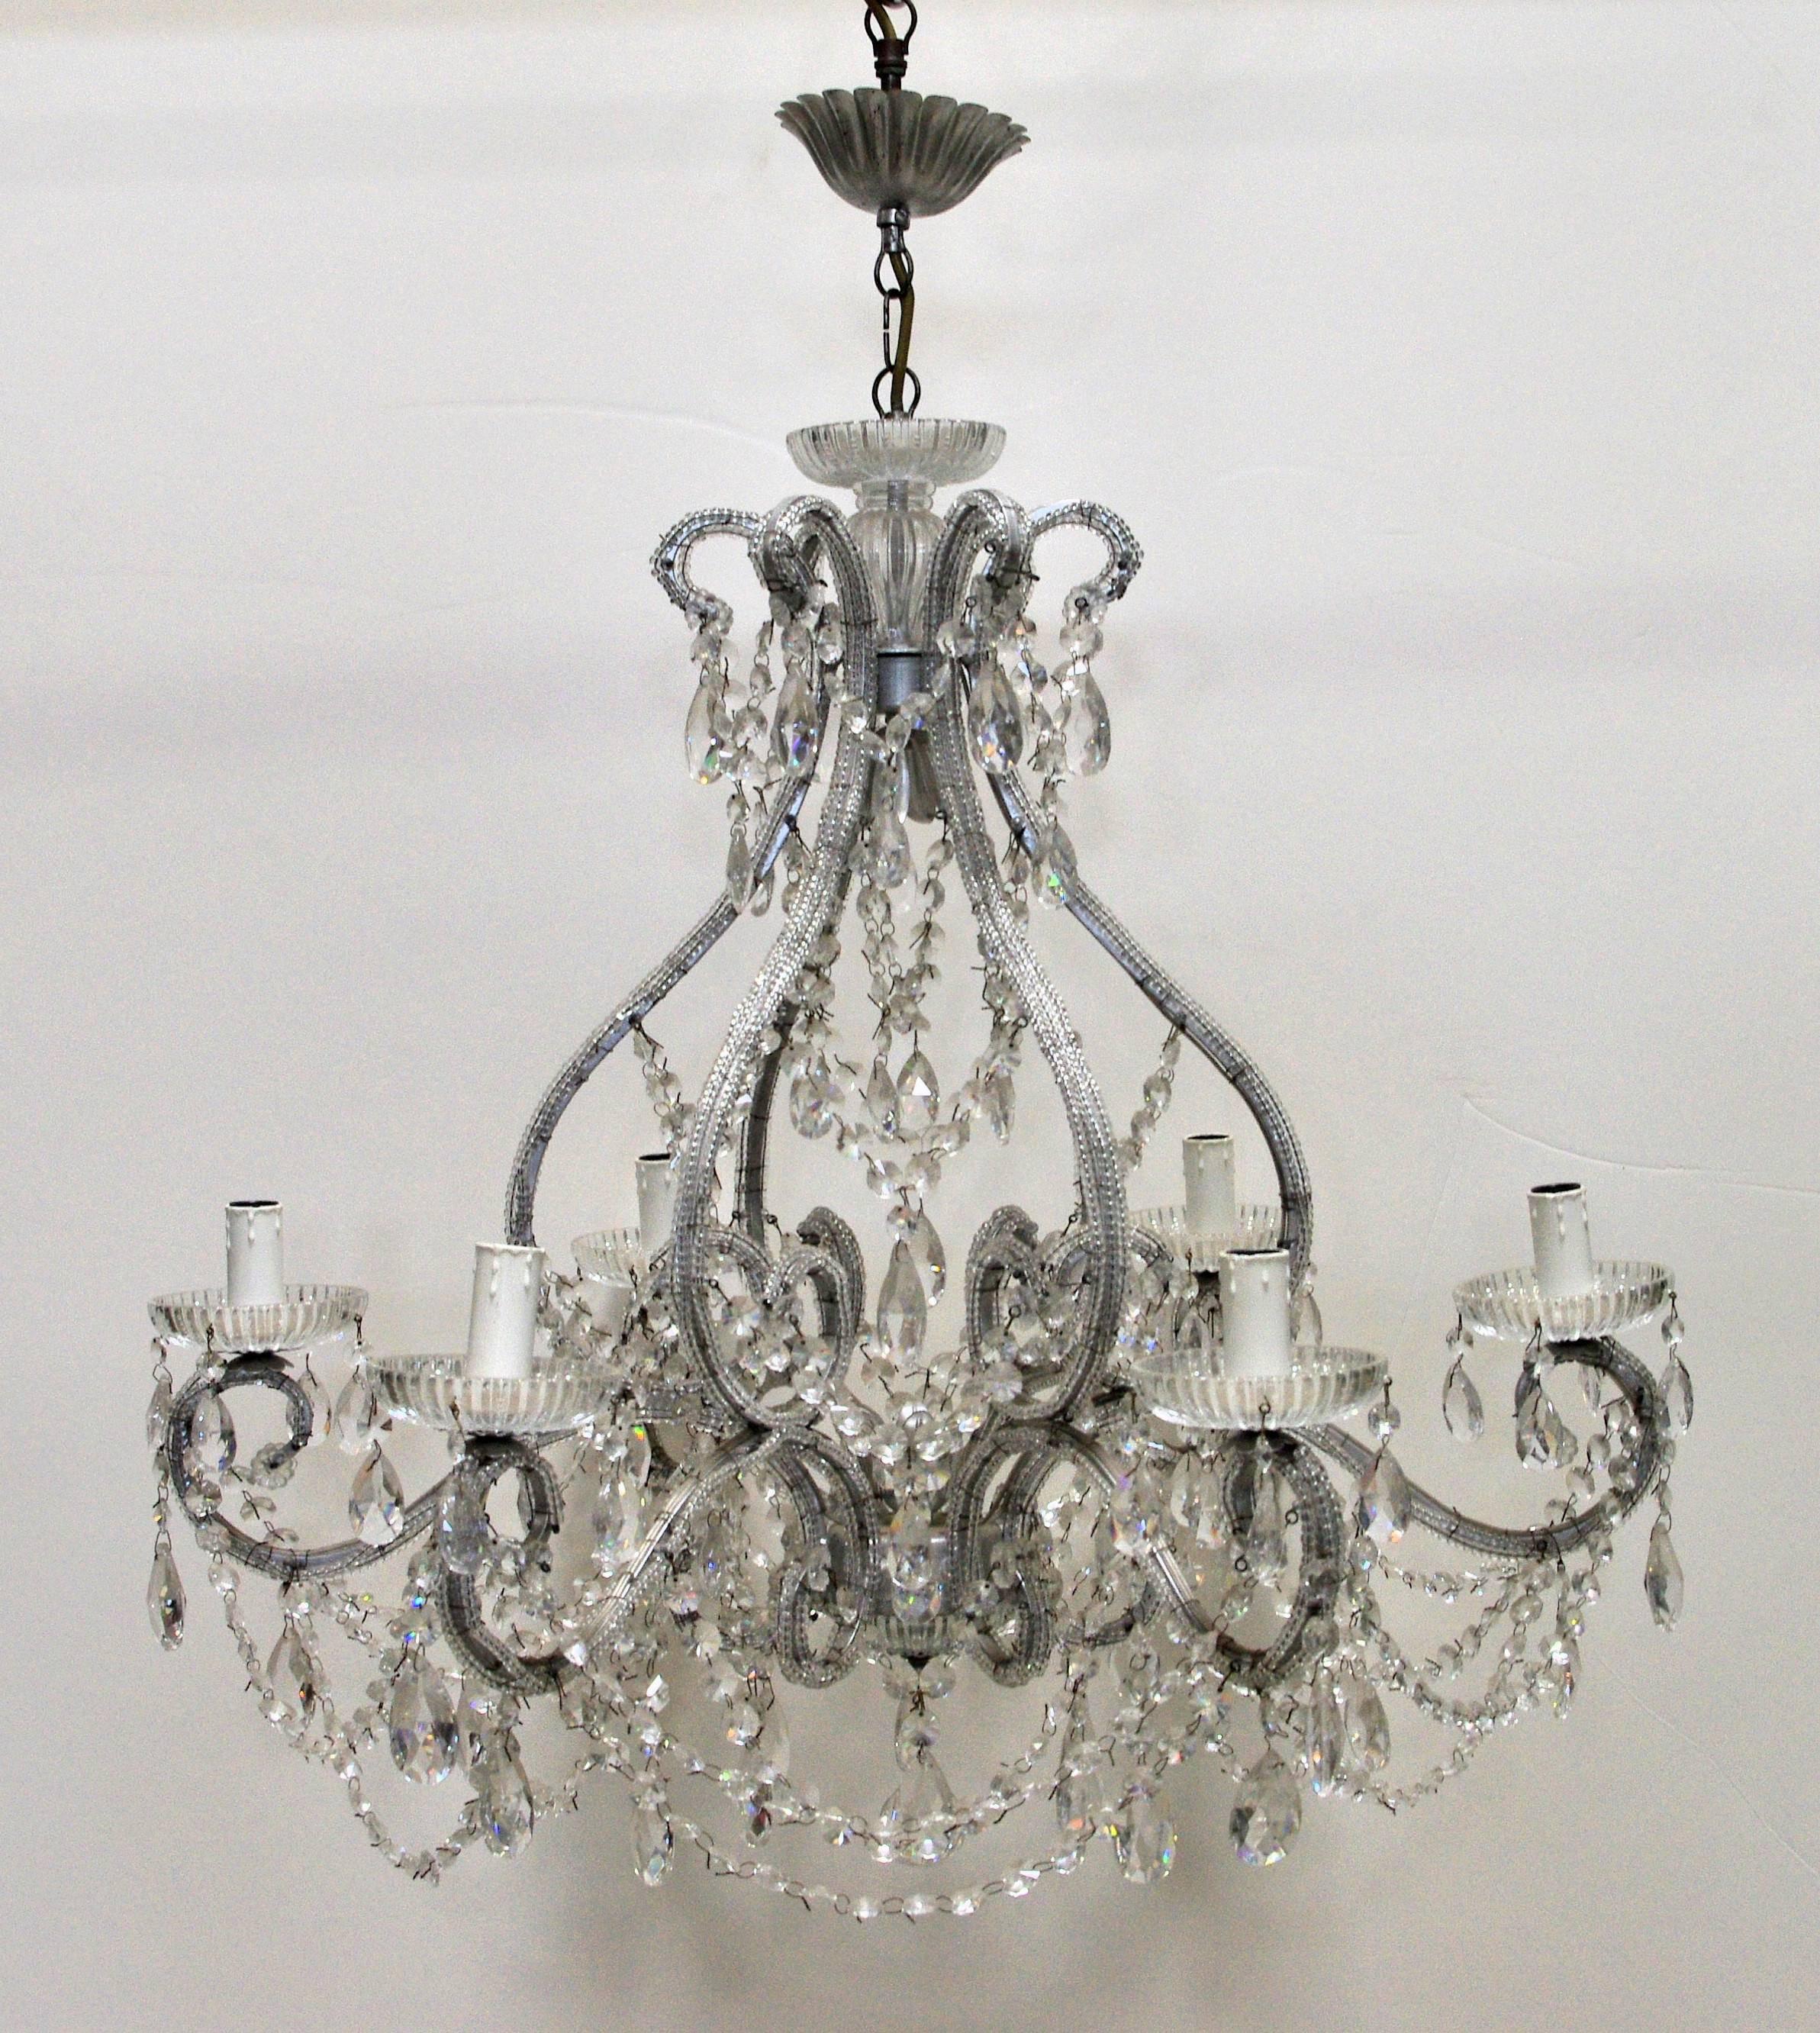 Vintage Italian Florentine chandelier with Swarovski crystals and silvered wrought iron / Made in Italy circa 1960’s
6 lights / E12 or E14 type / max 40W each
Diameter: 28 inches / Height: 32 inches plus chain and canopy
2 in stock in Palm Springs